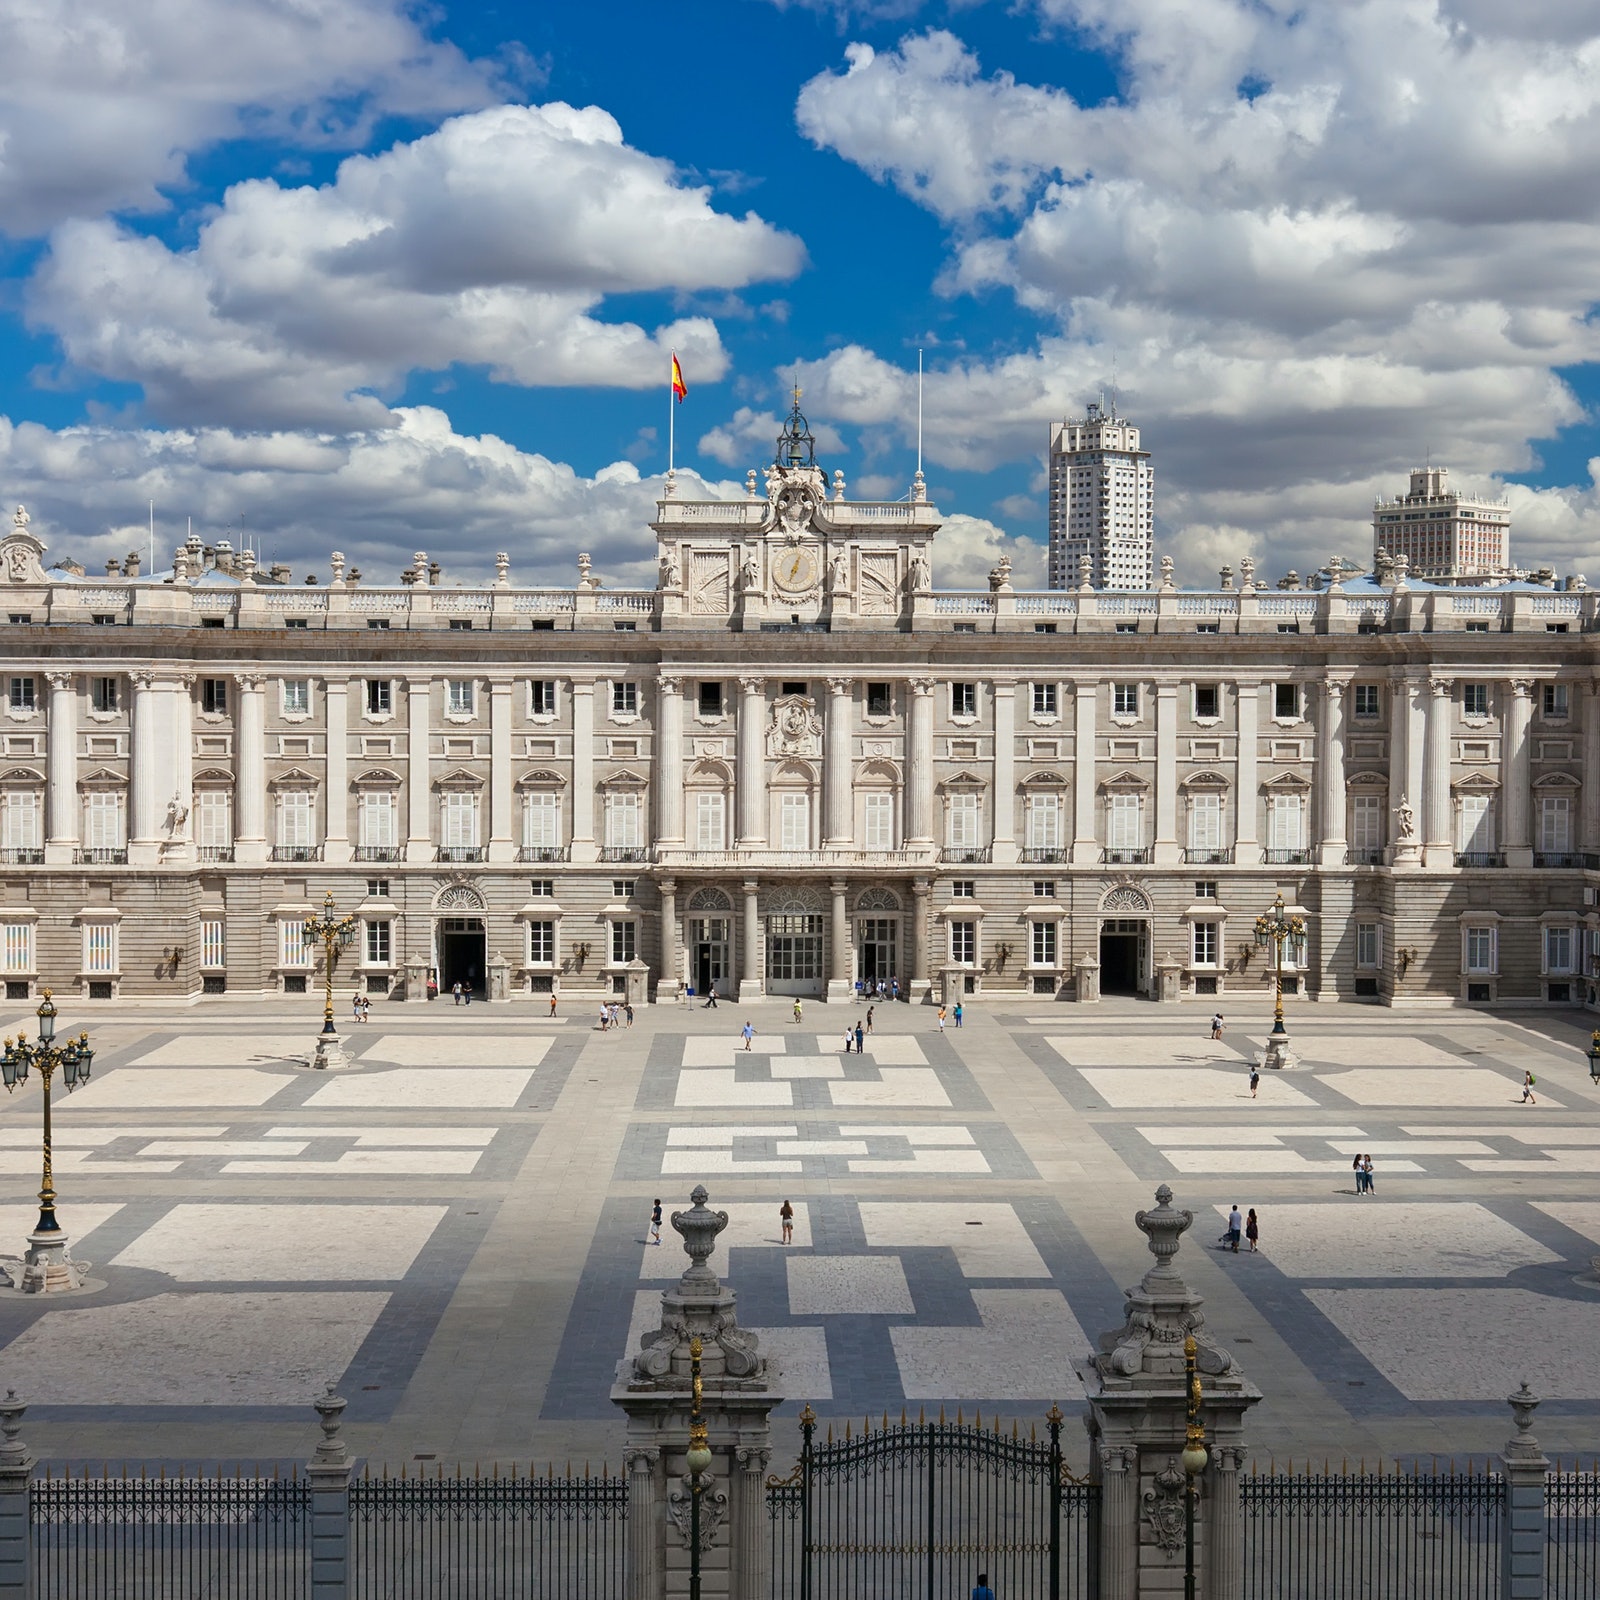 Royal Palace Madrid: Skip-The-Line Entrance & Guided Tour in Spain